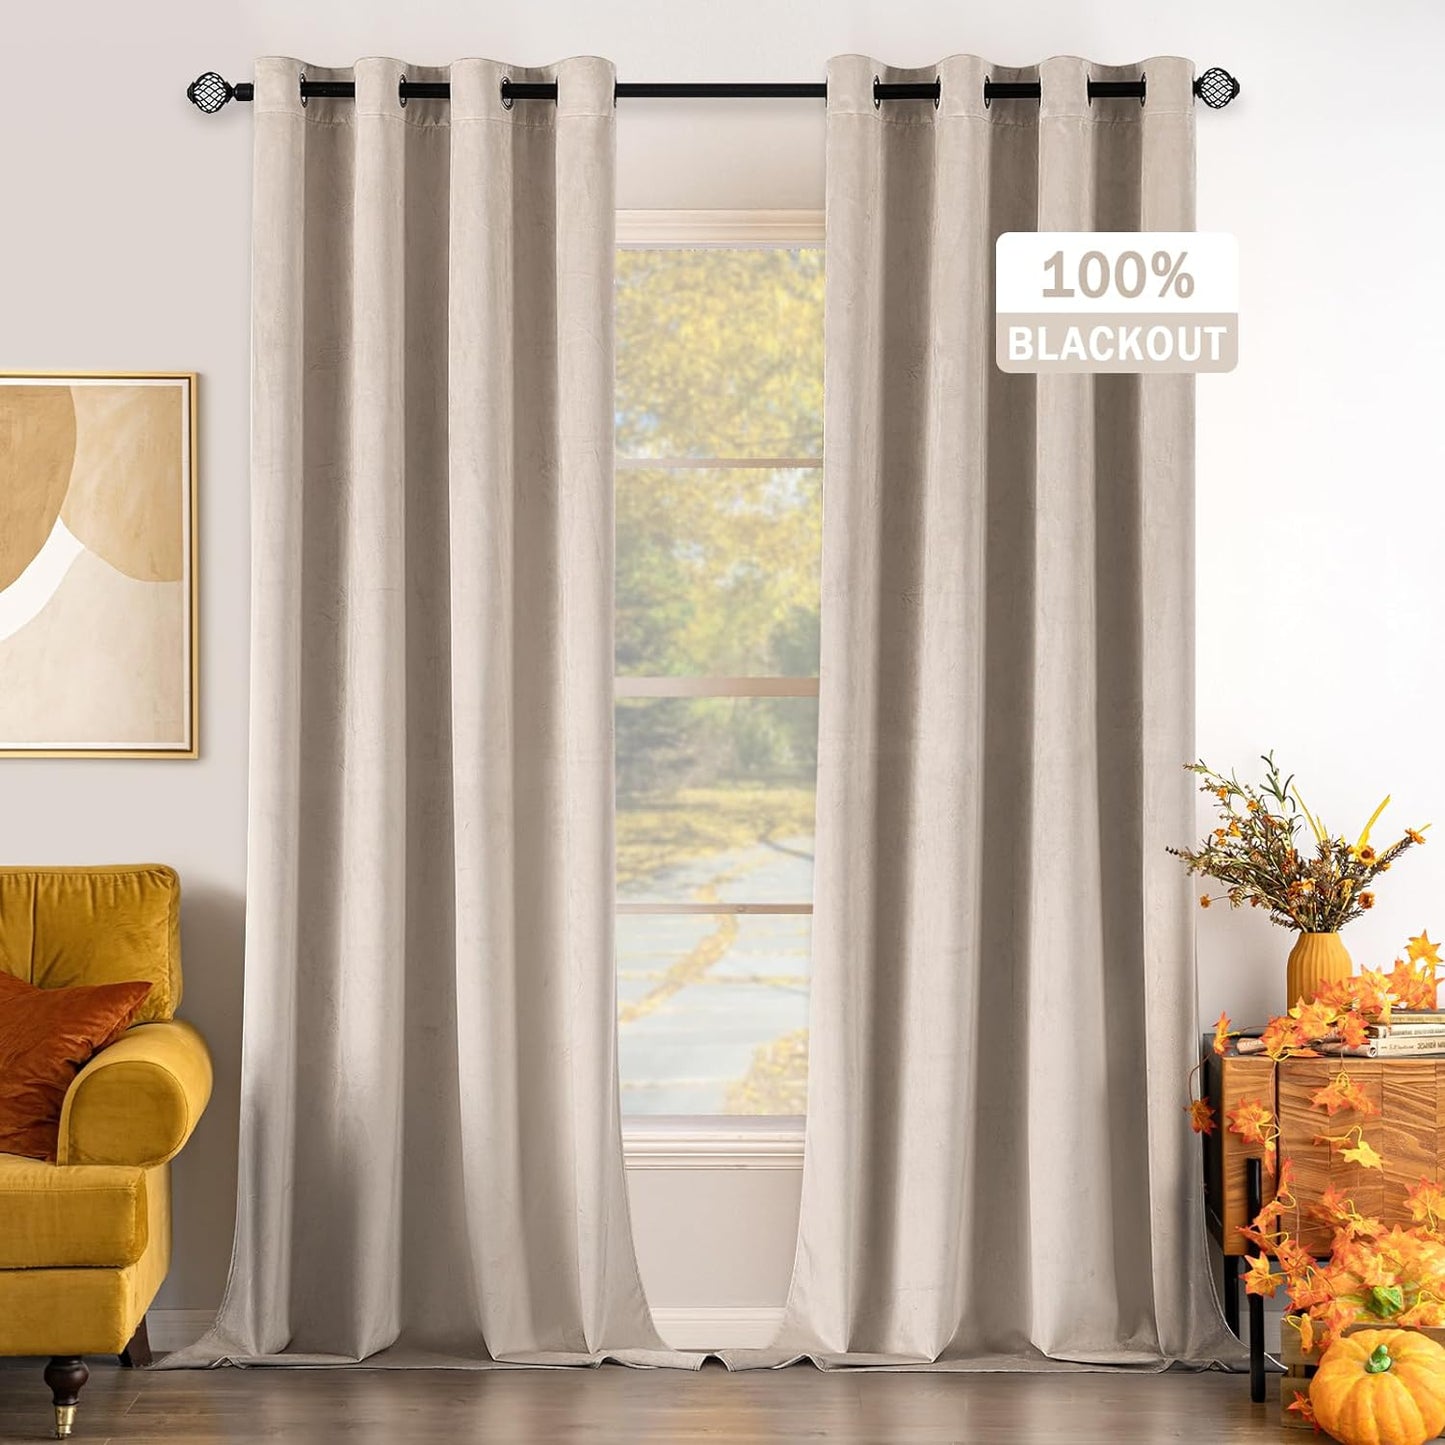 EMEMA Olive Green Velvet Curtains 84 Inch Length 2 Panels Set, Room Darkening Luxury Curtains, Grommet Thermal Insulated Drapes, Window Curtains for Living Room, W52 X L84, Olive Green  EMEMA 100 Blackout/ Beige W52" X L96" 